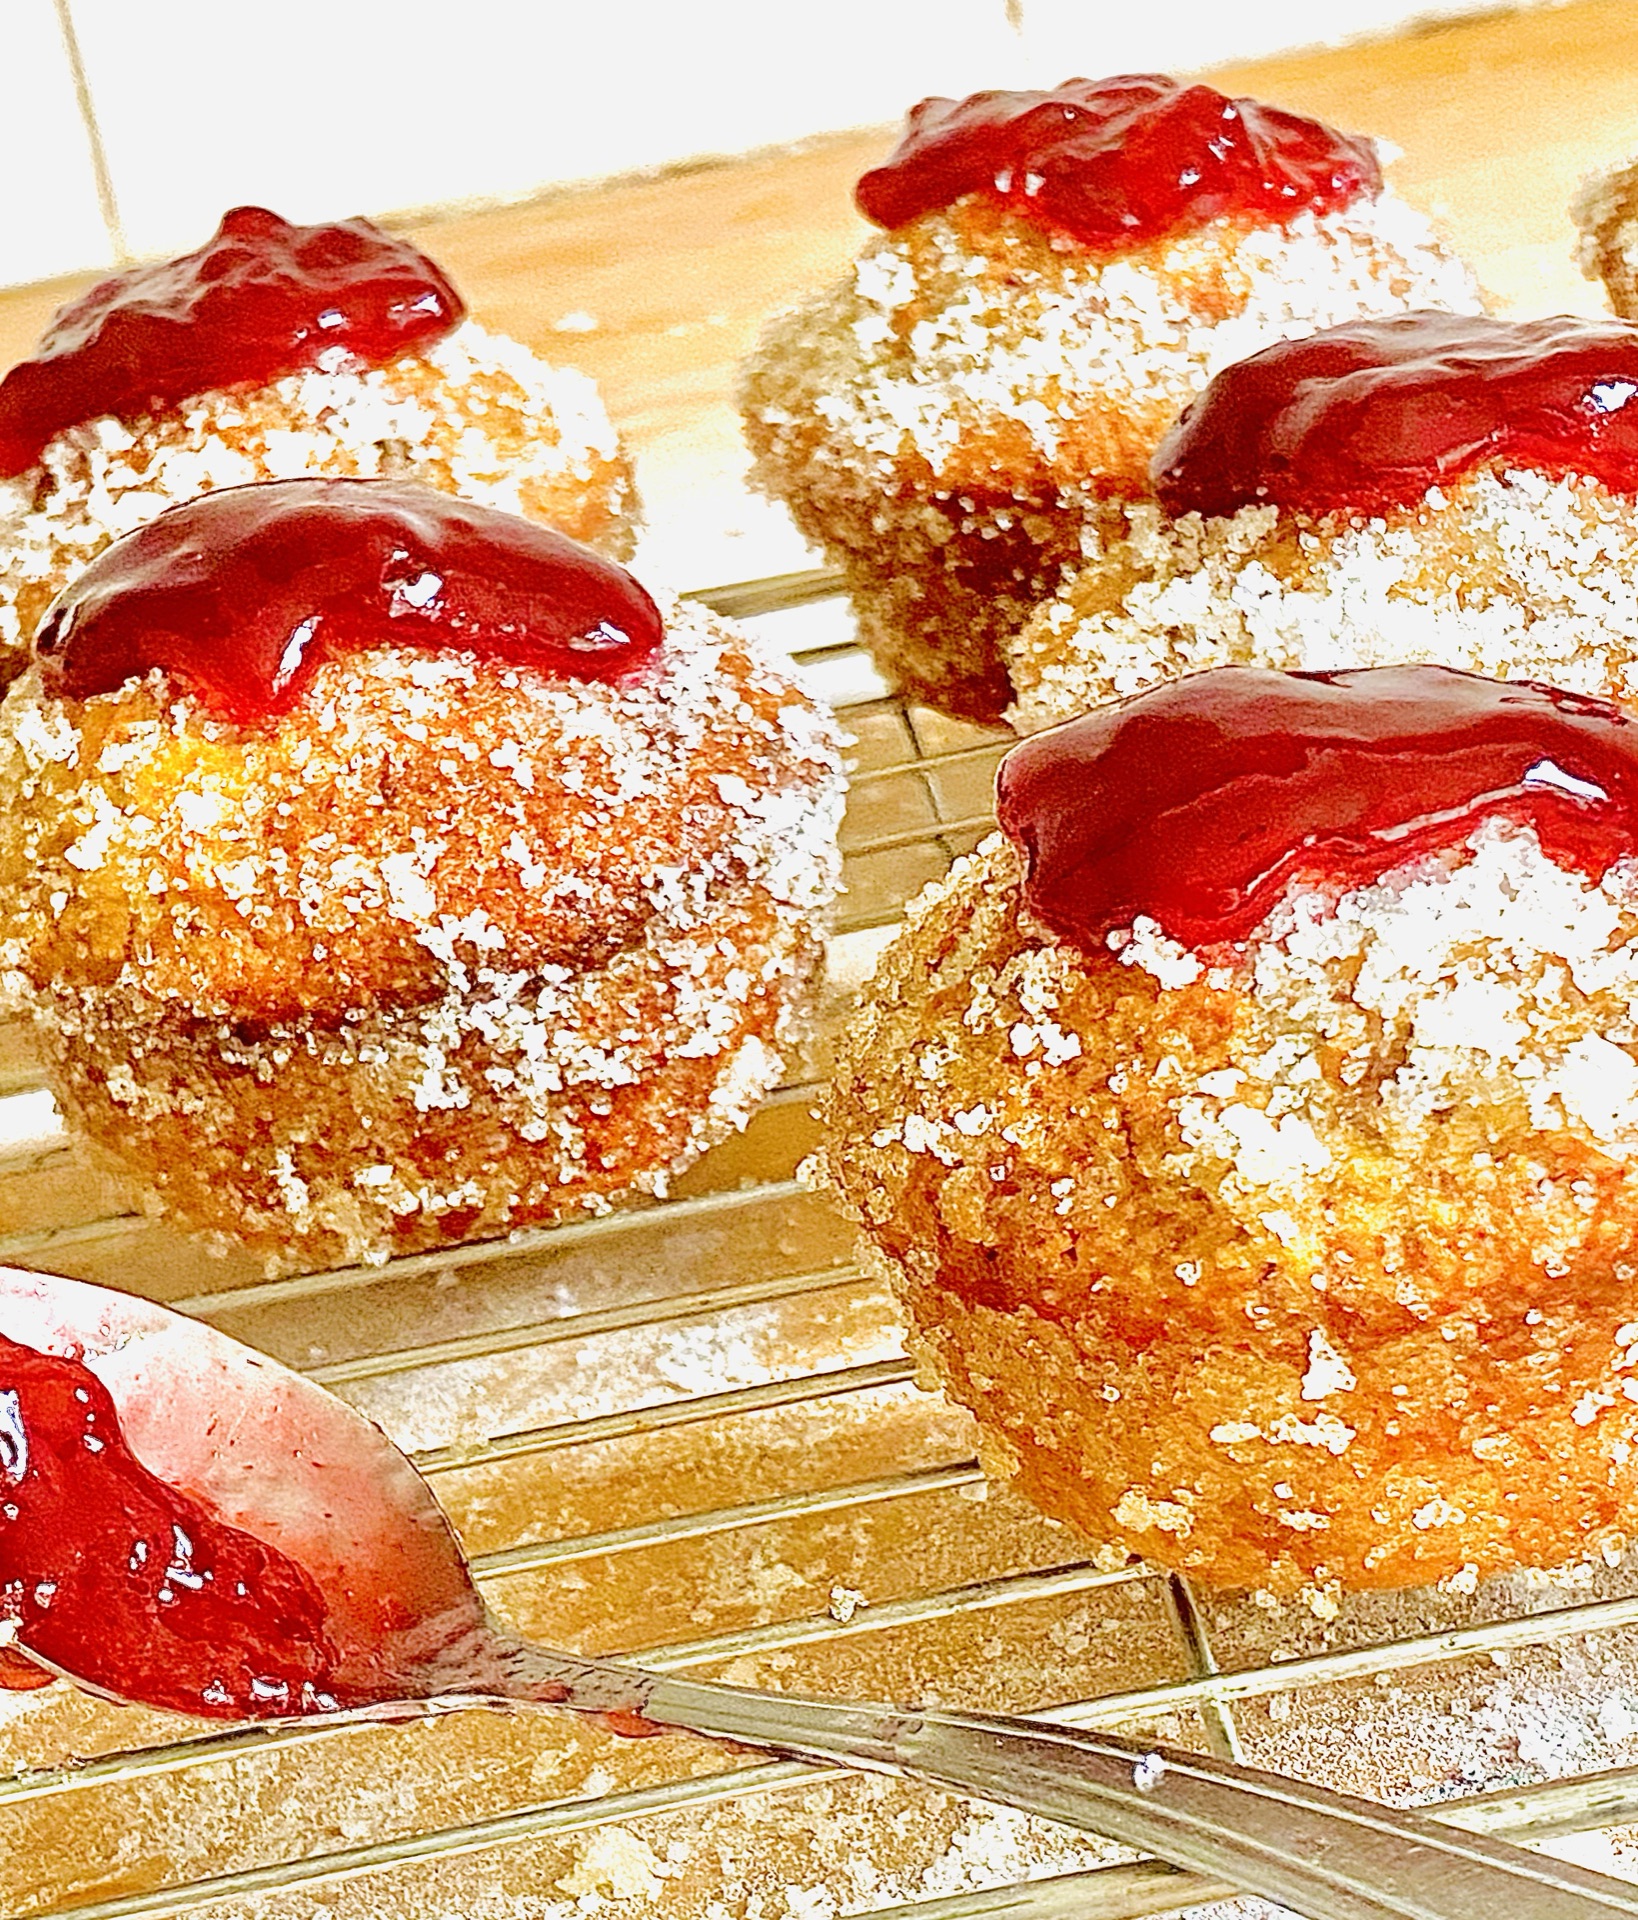 Jam donut muffins, coated in sugar and topped with raspberry jam on a cooling rack